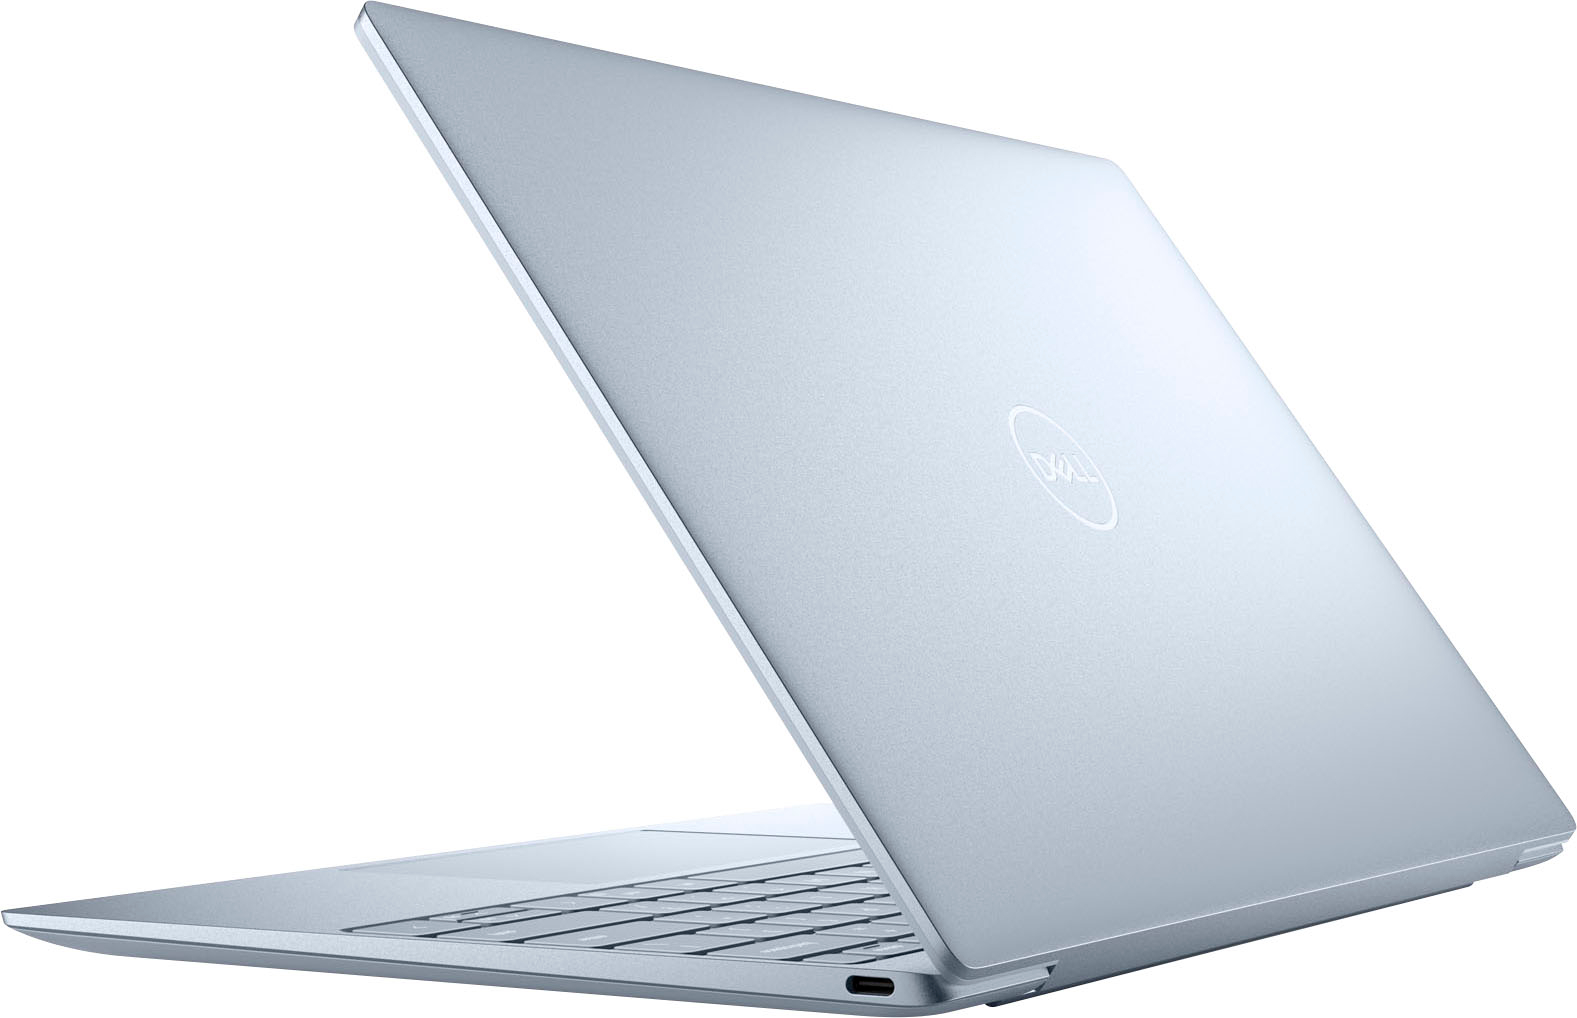 Dell XPS 13 13.4